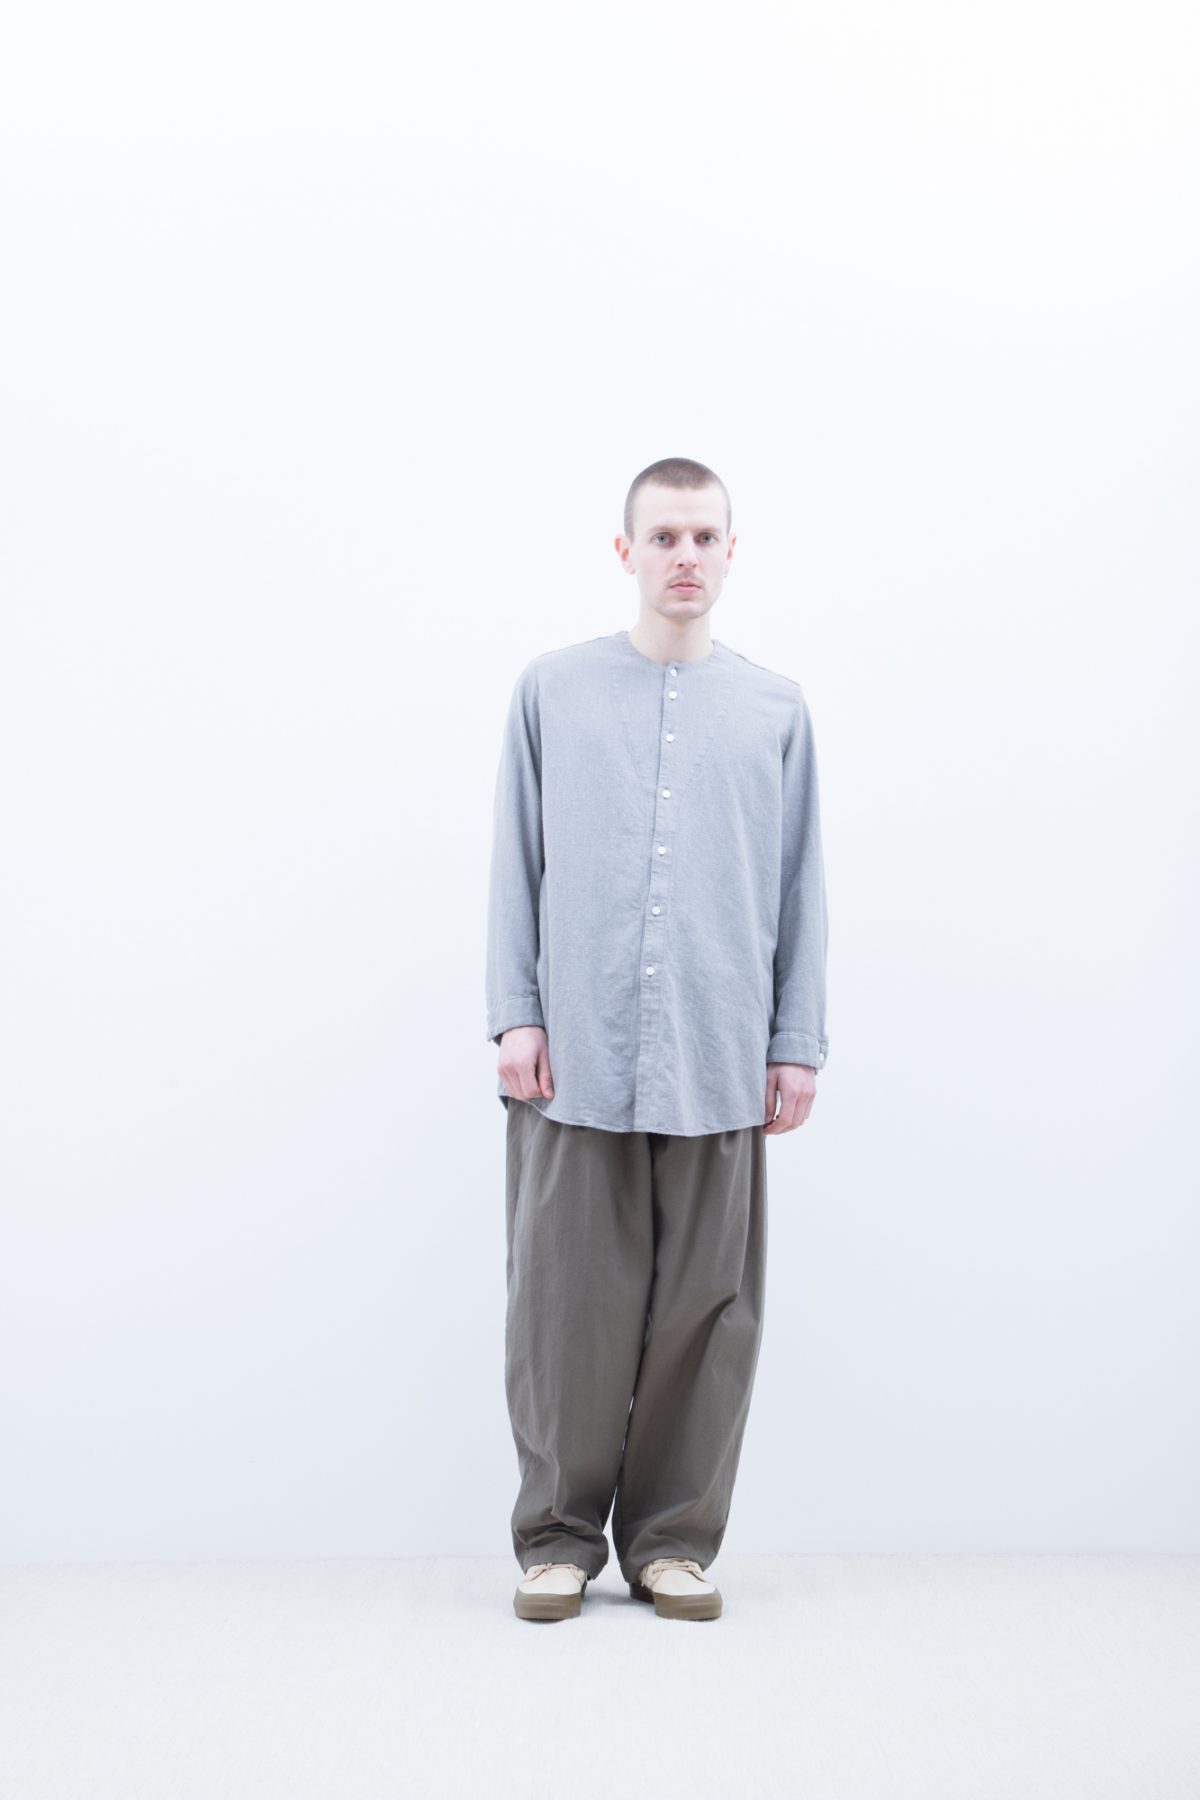 No. 041 | 2018 AW MENS | LOOK | FIRMUM